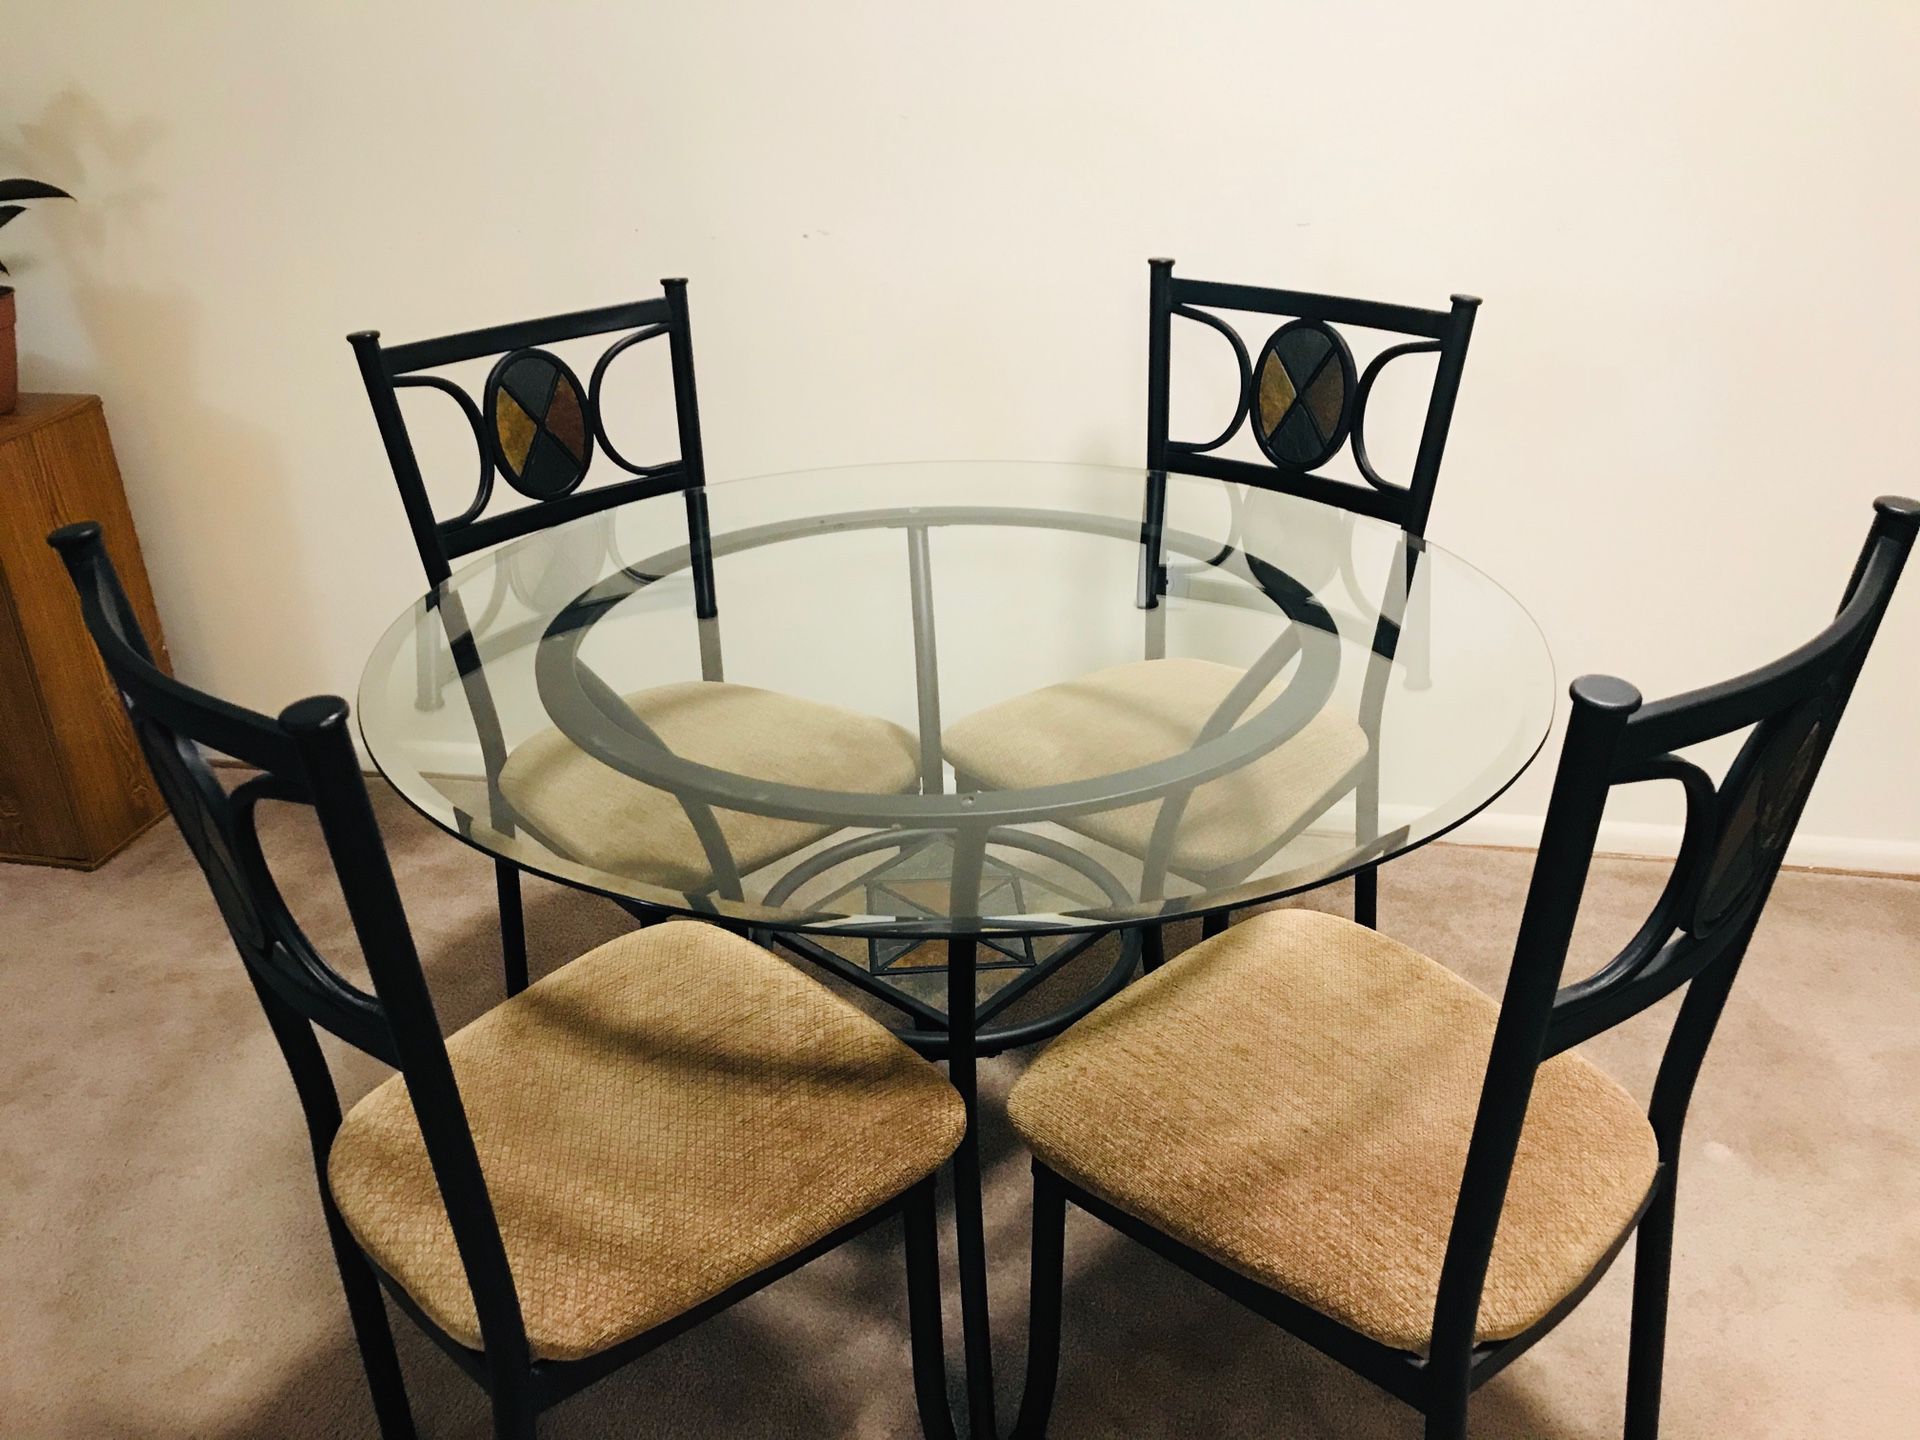 Dinner table +chairs